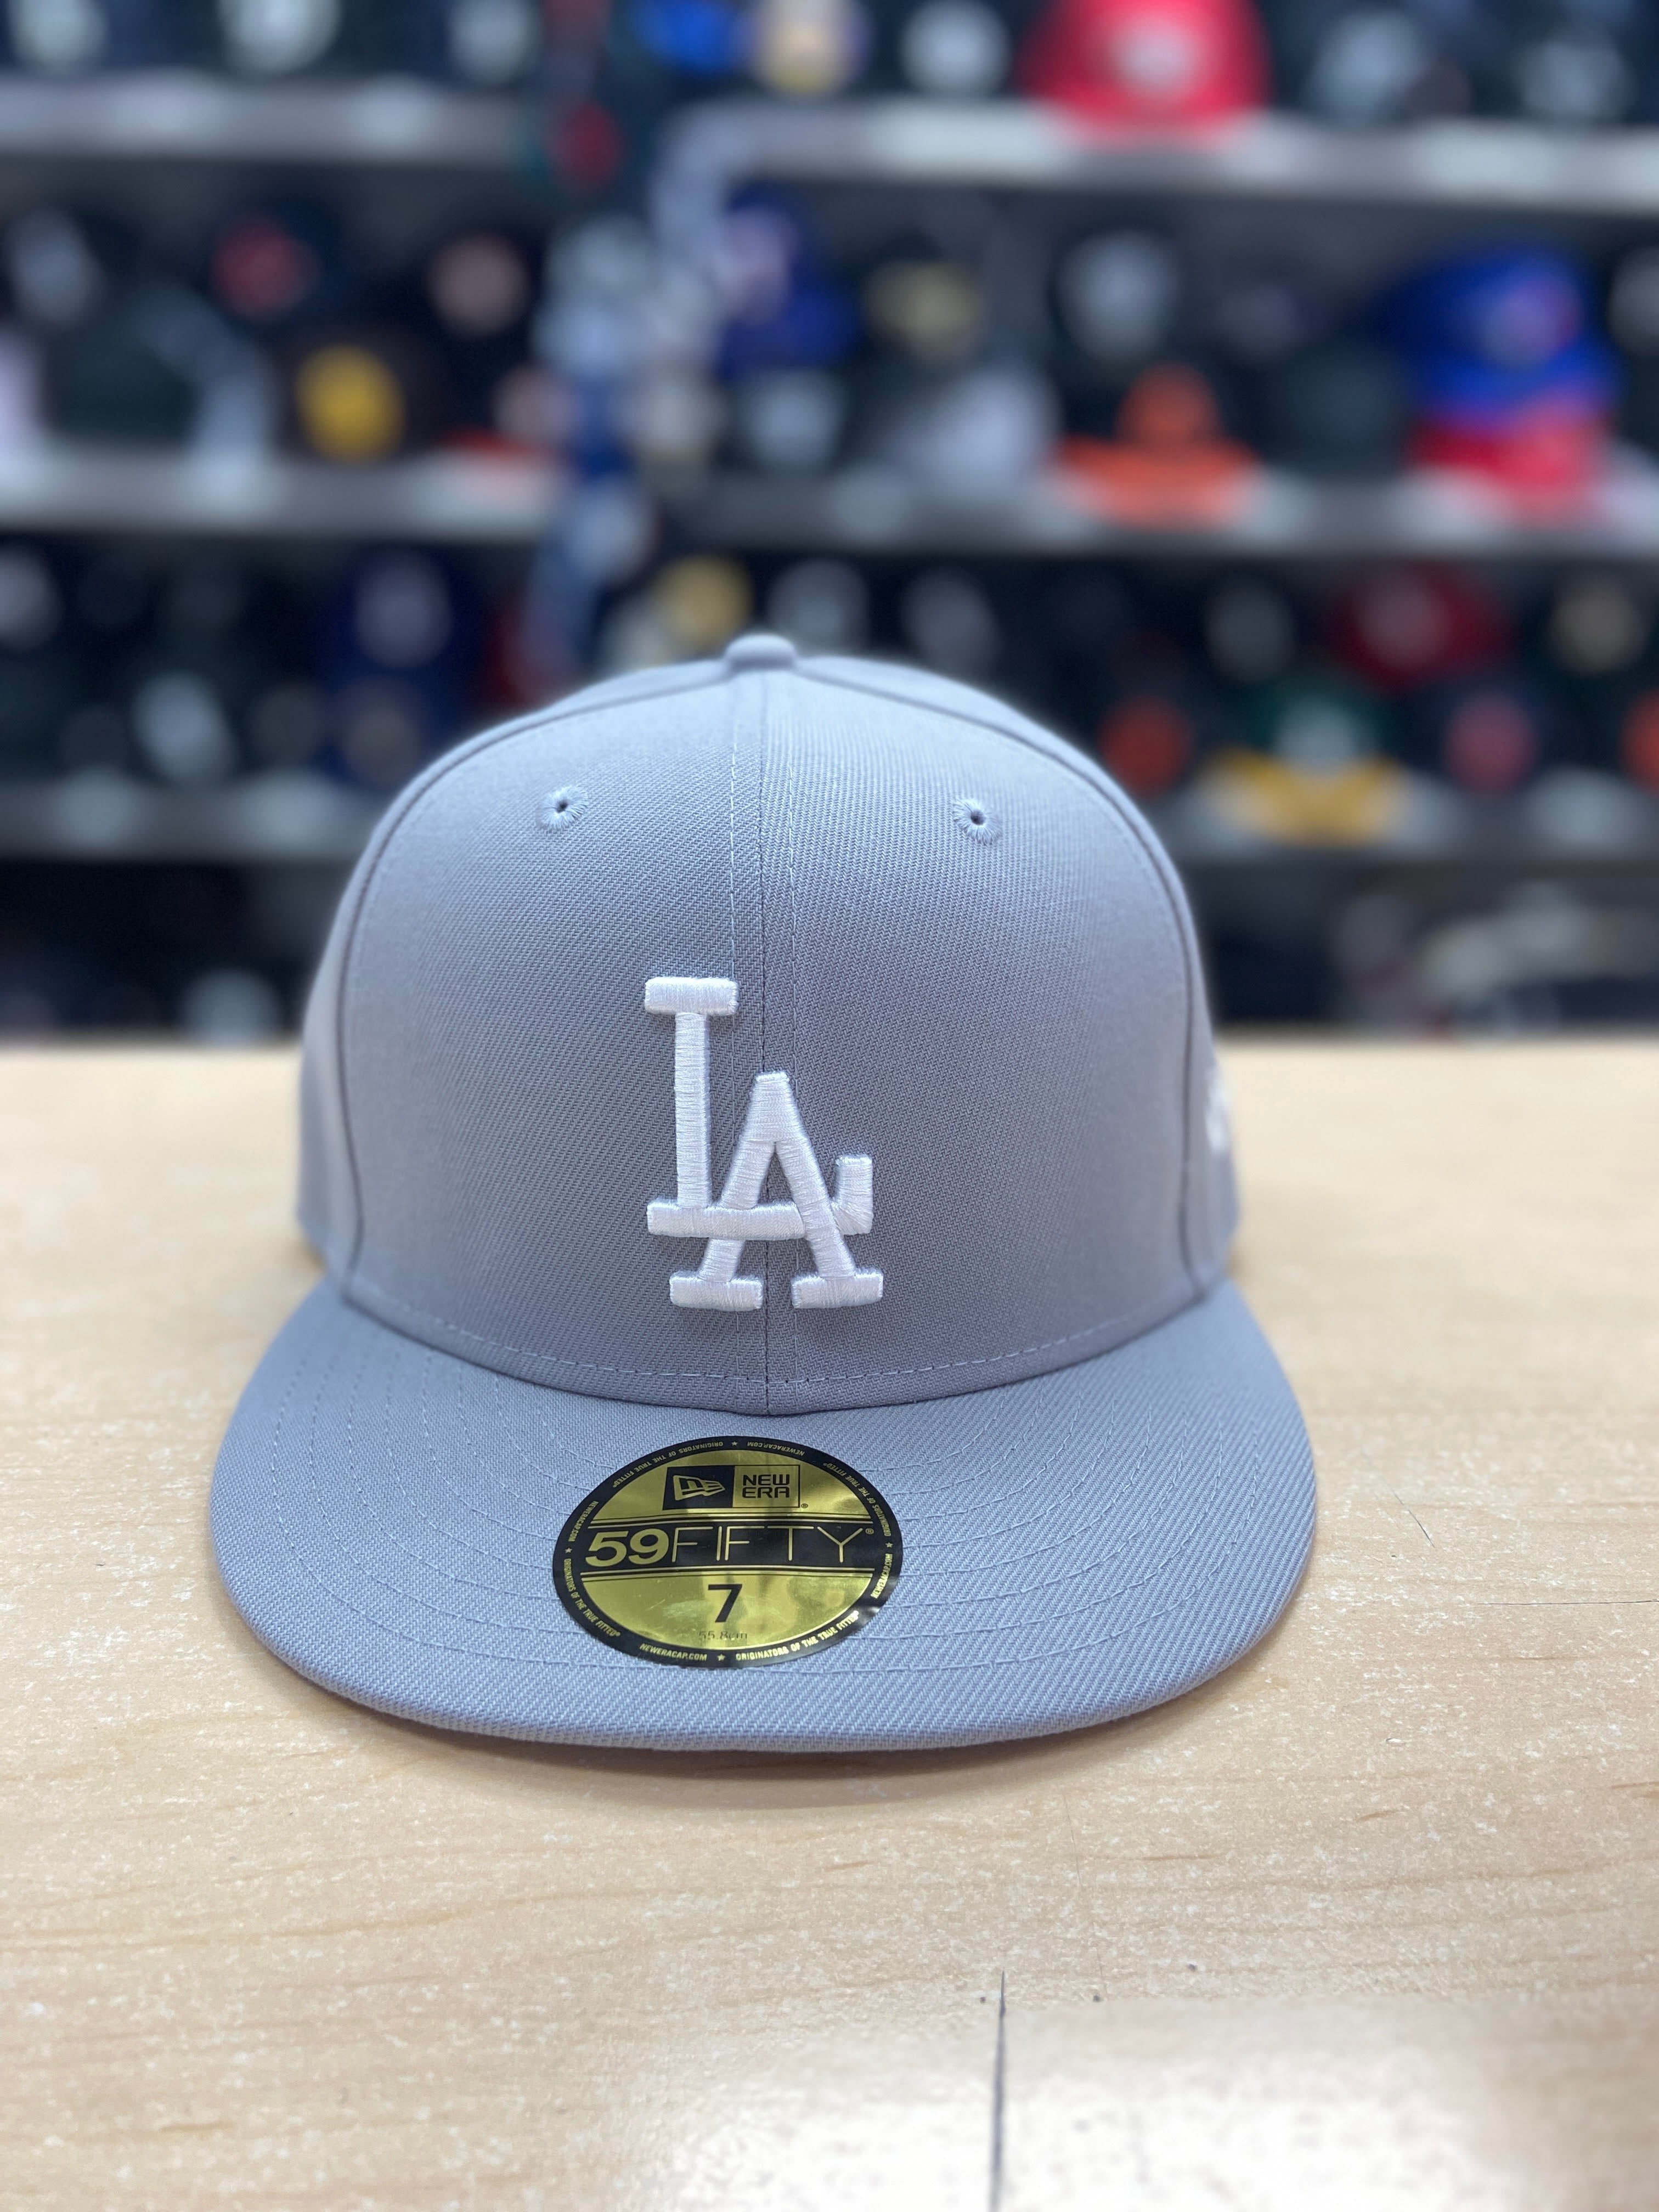 Los Angeles Dodgers New Era 59FIFTY Fitted Hat - Grey